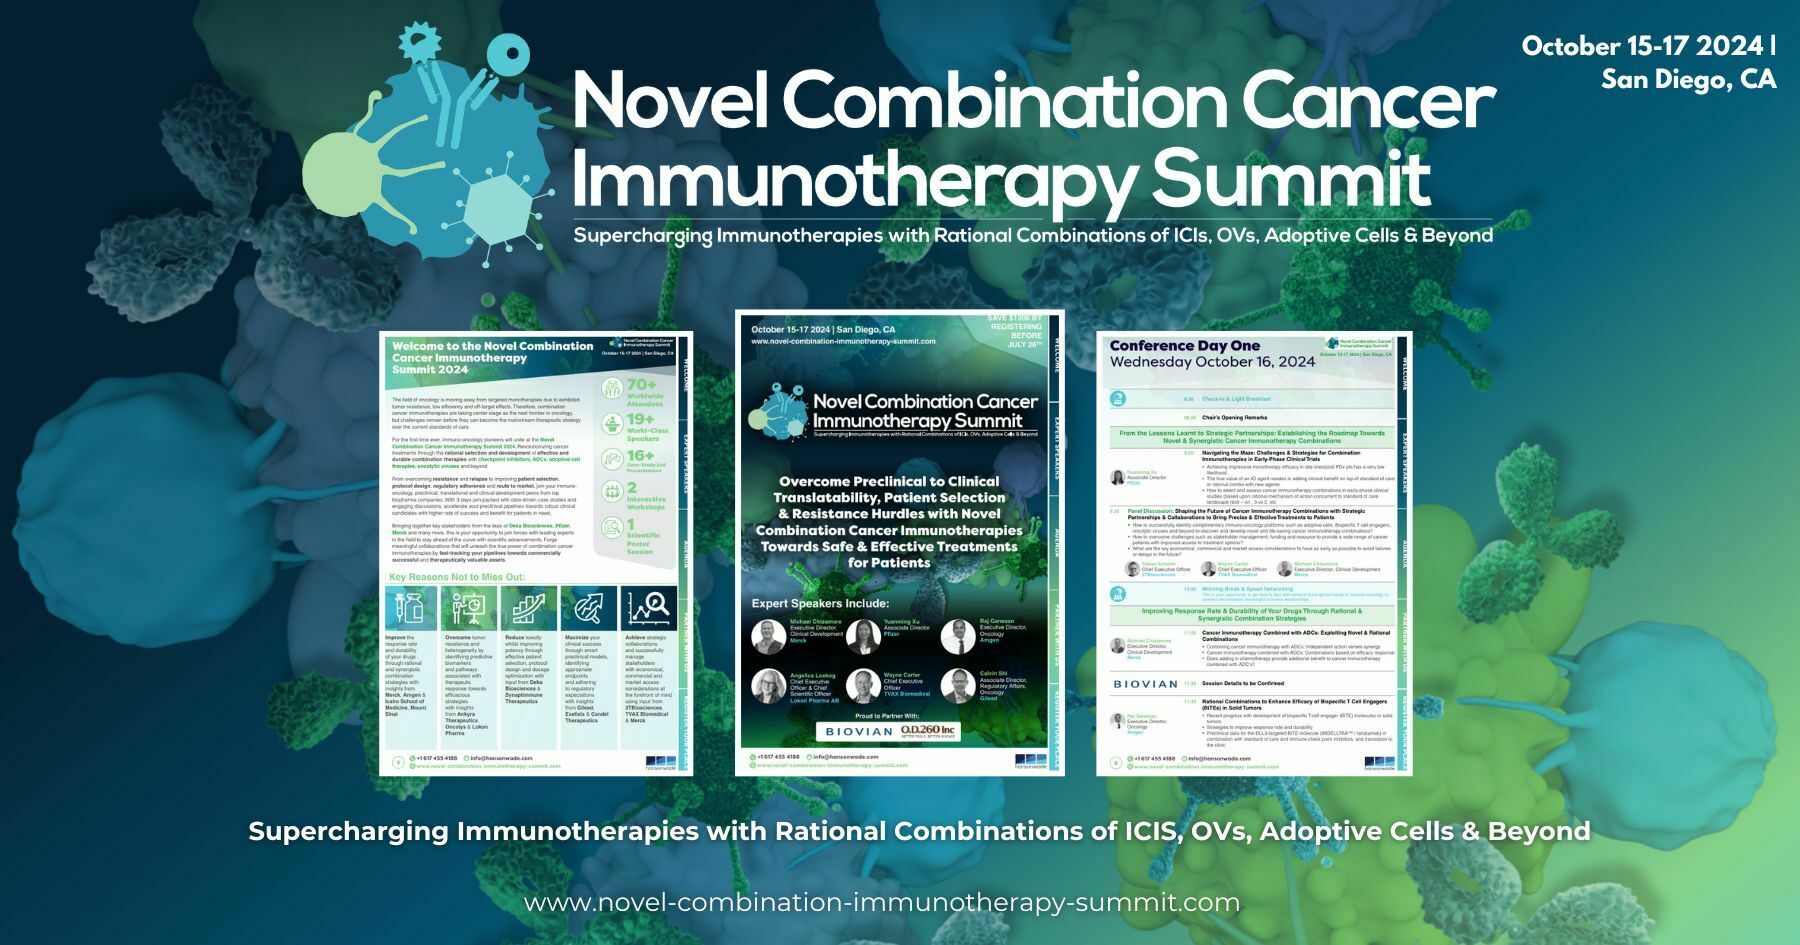 Novel Combination Cancer Immunotherapy Summit 2024, San Diego, California, United States